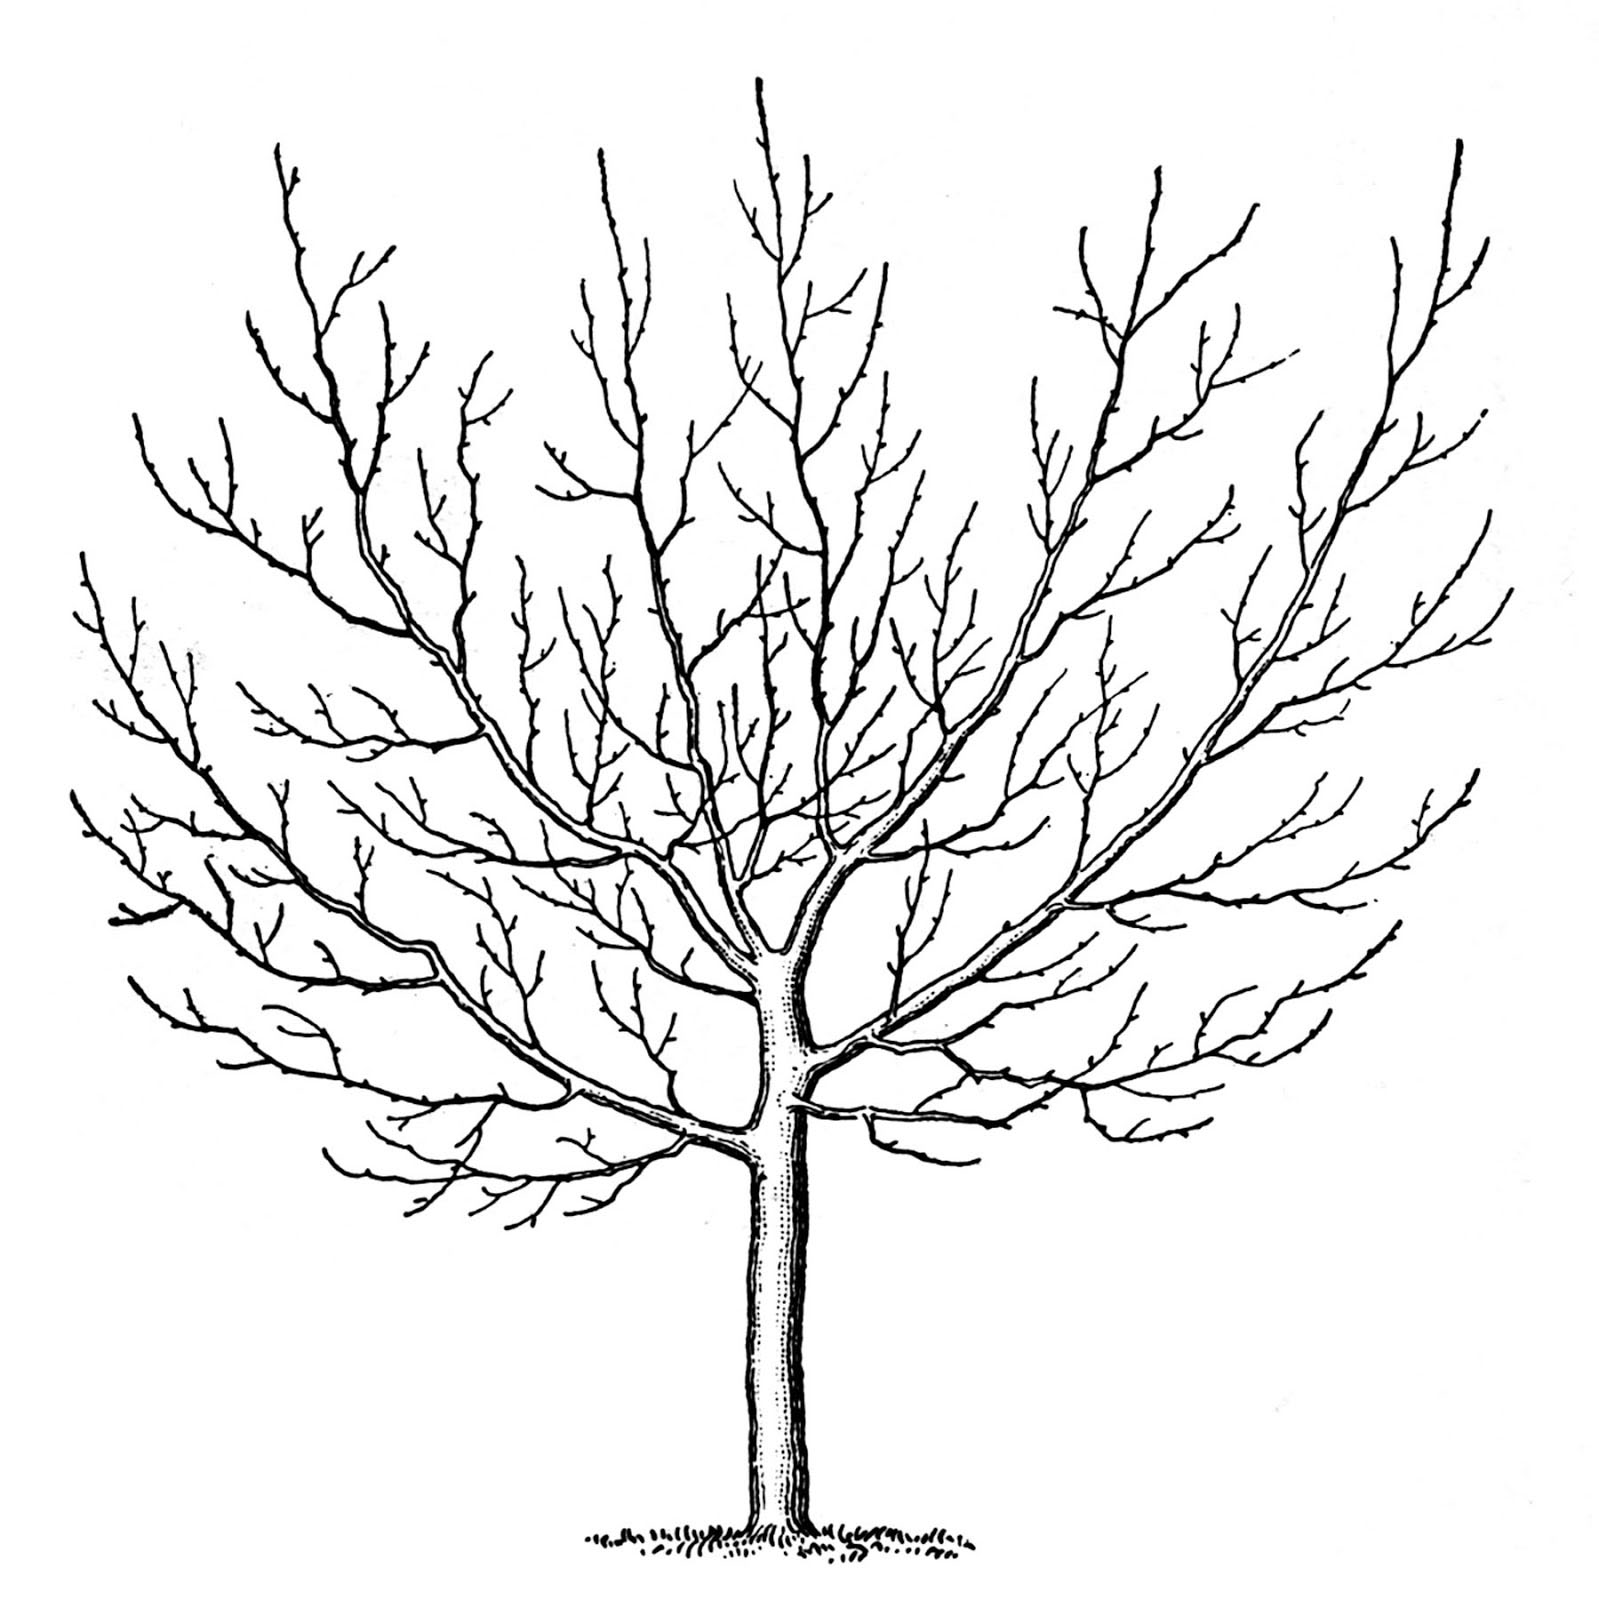 under the tree clipart black and white